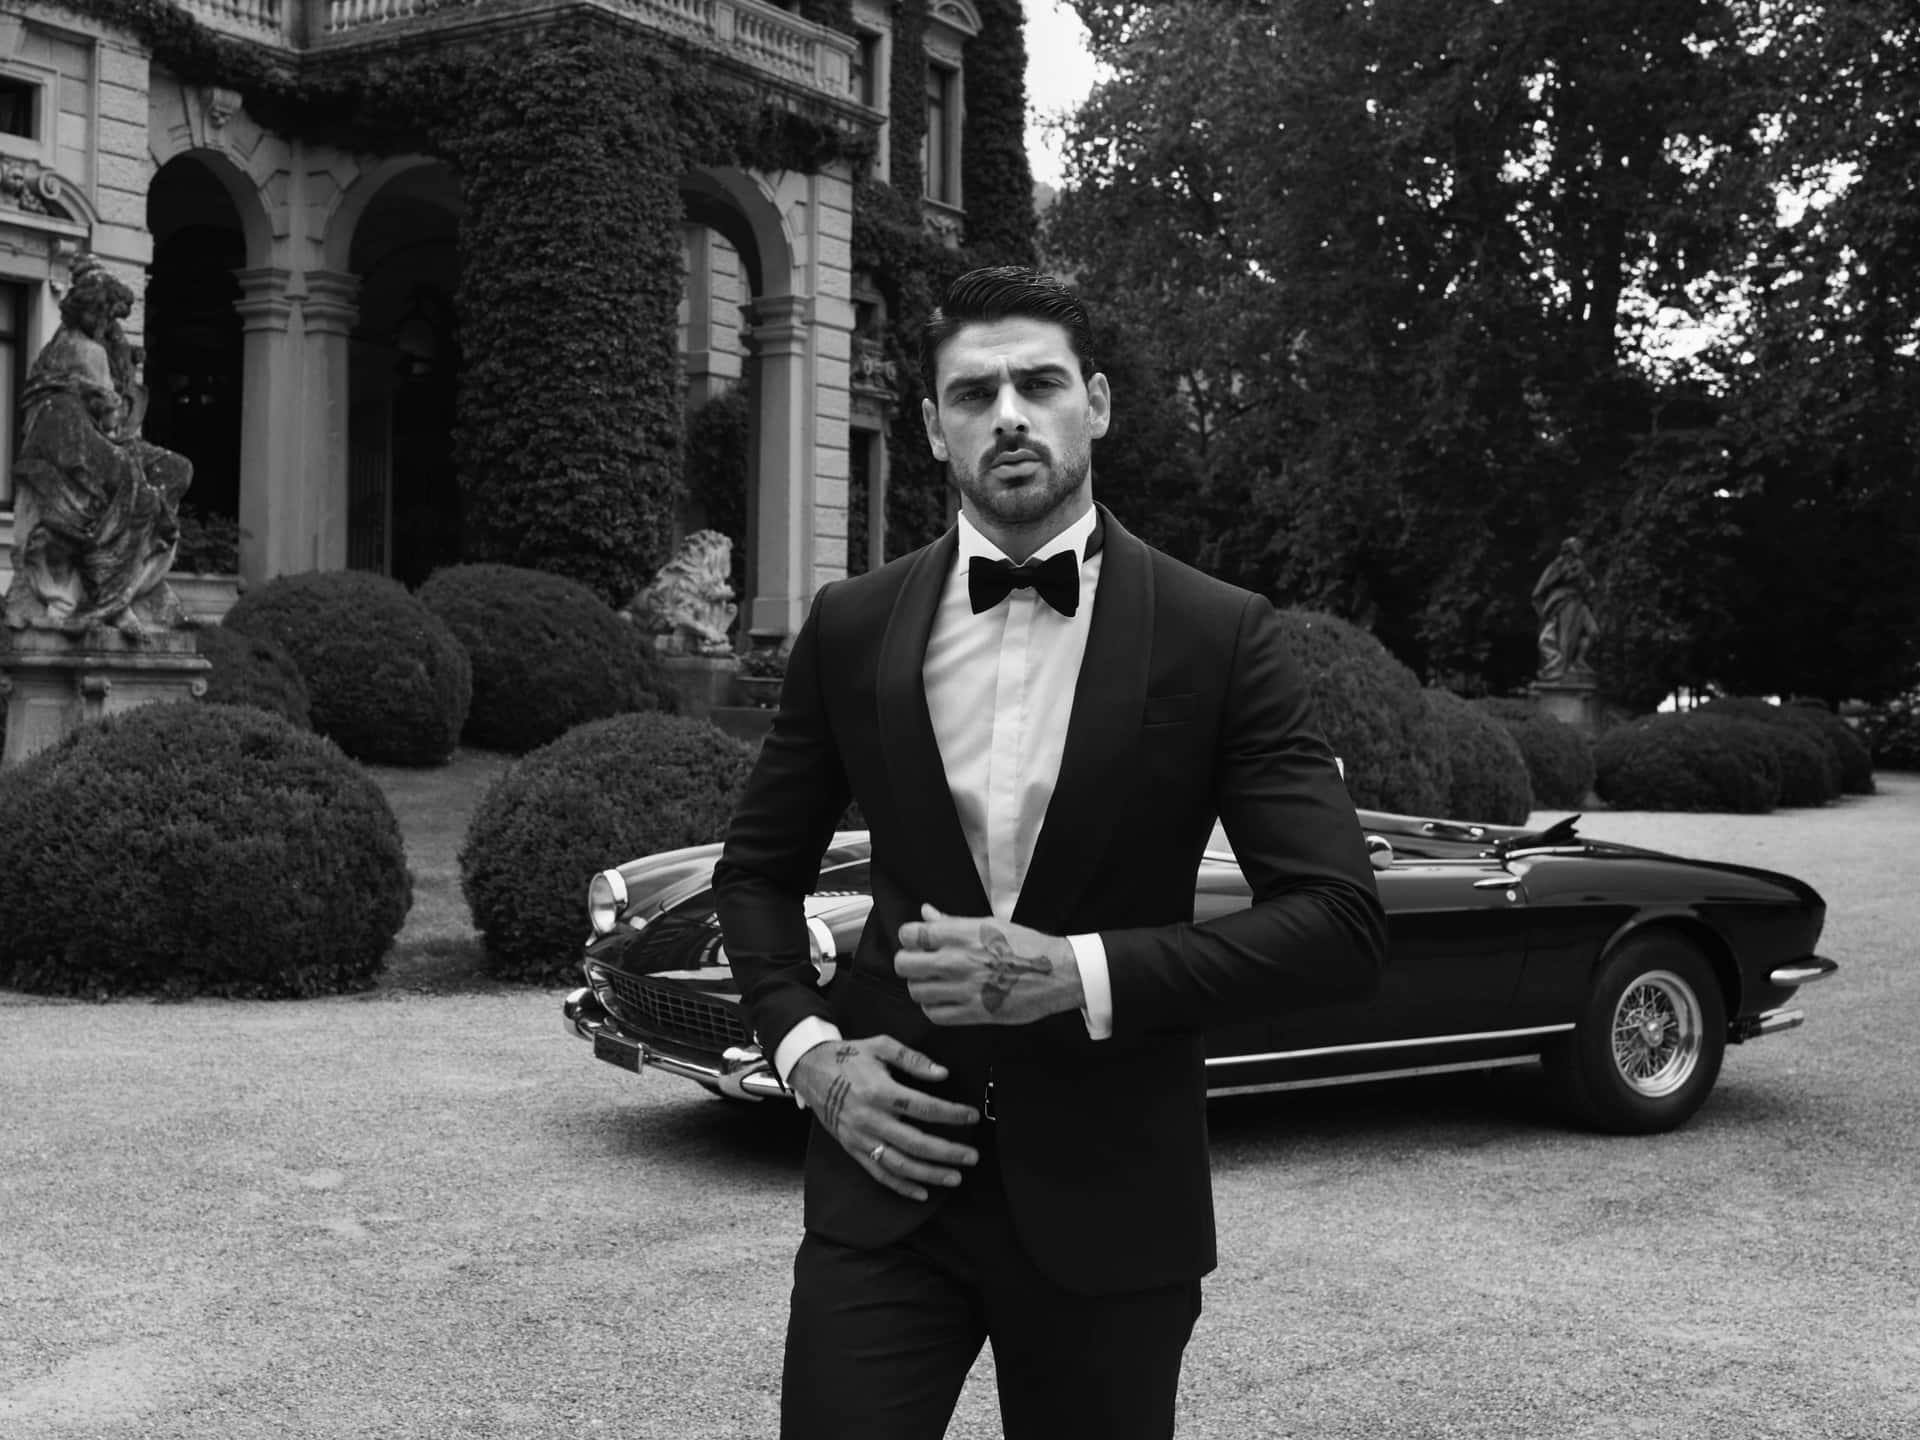 A Man In A Tuxedo Standing Next To A Car